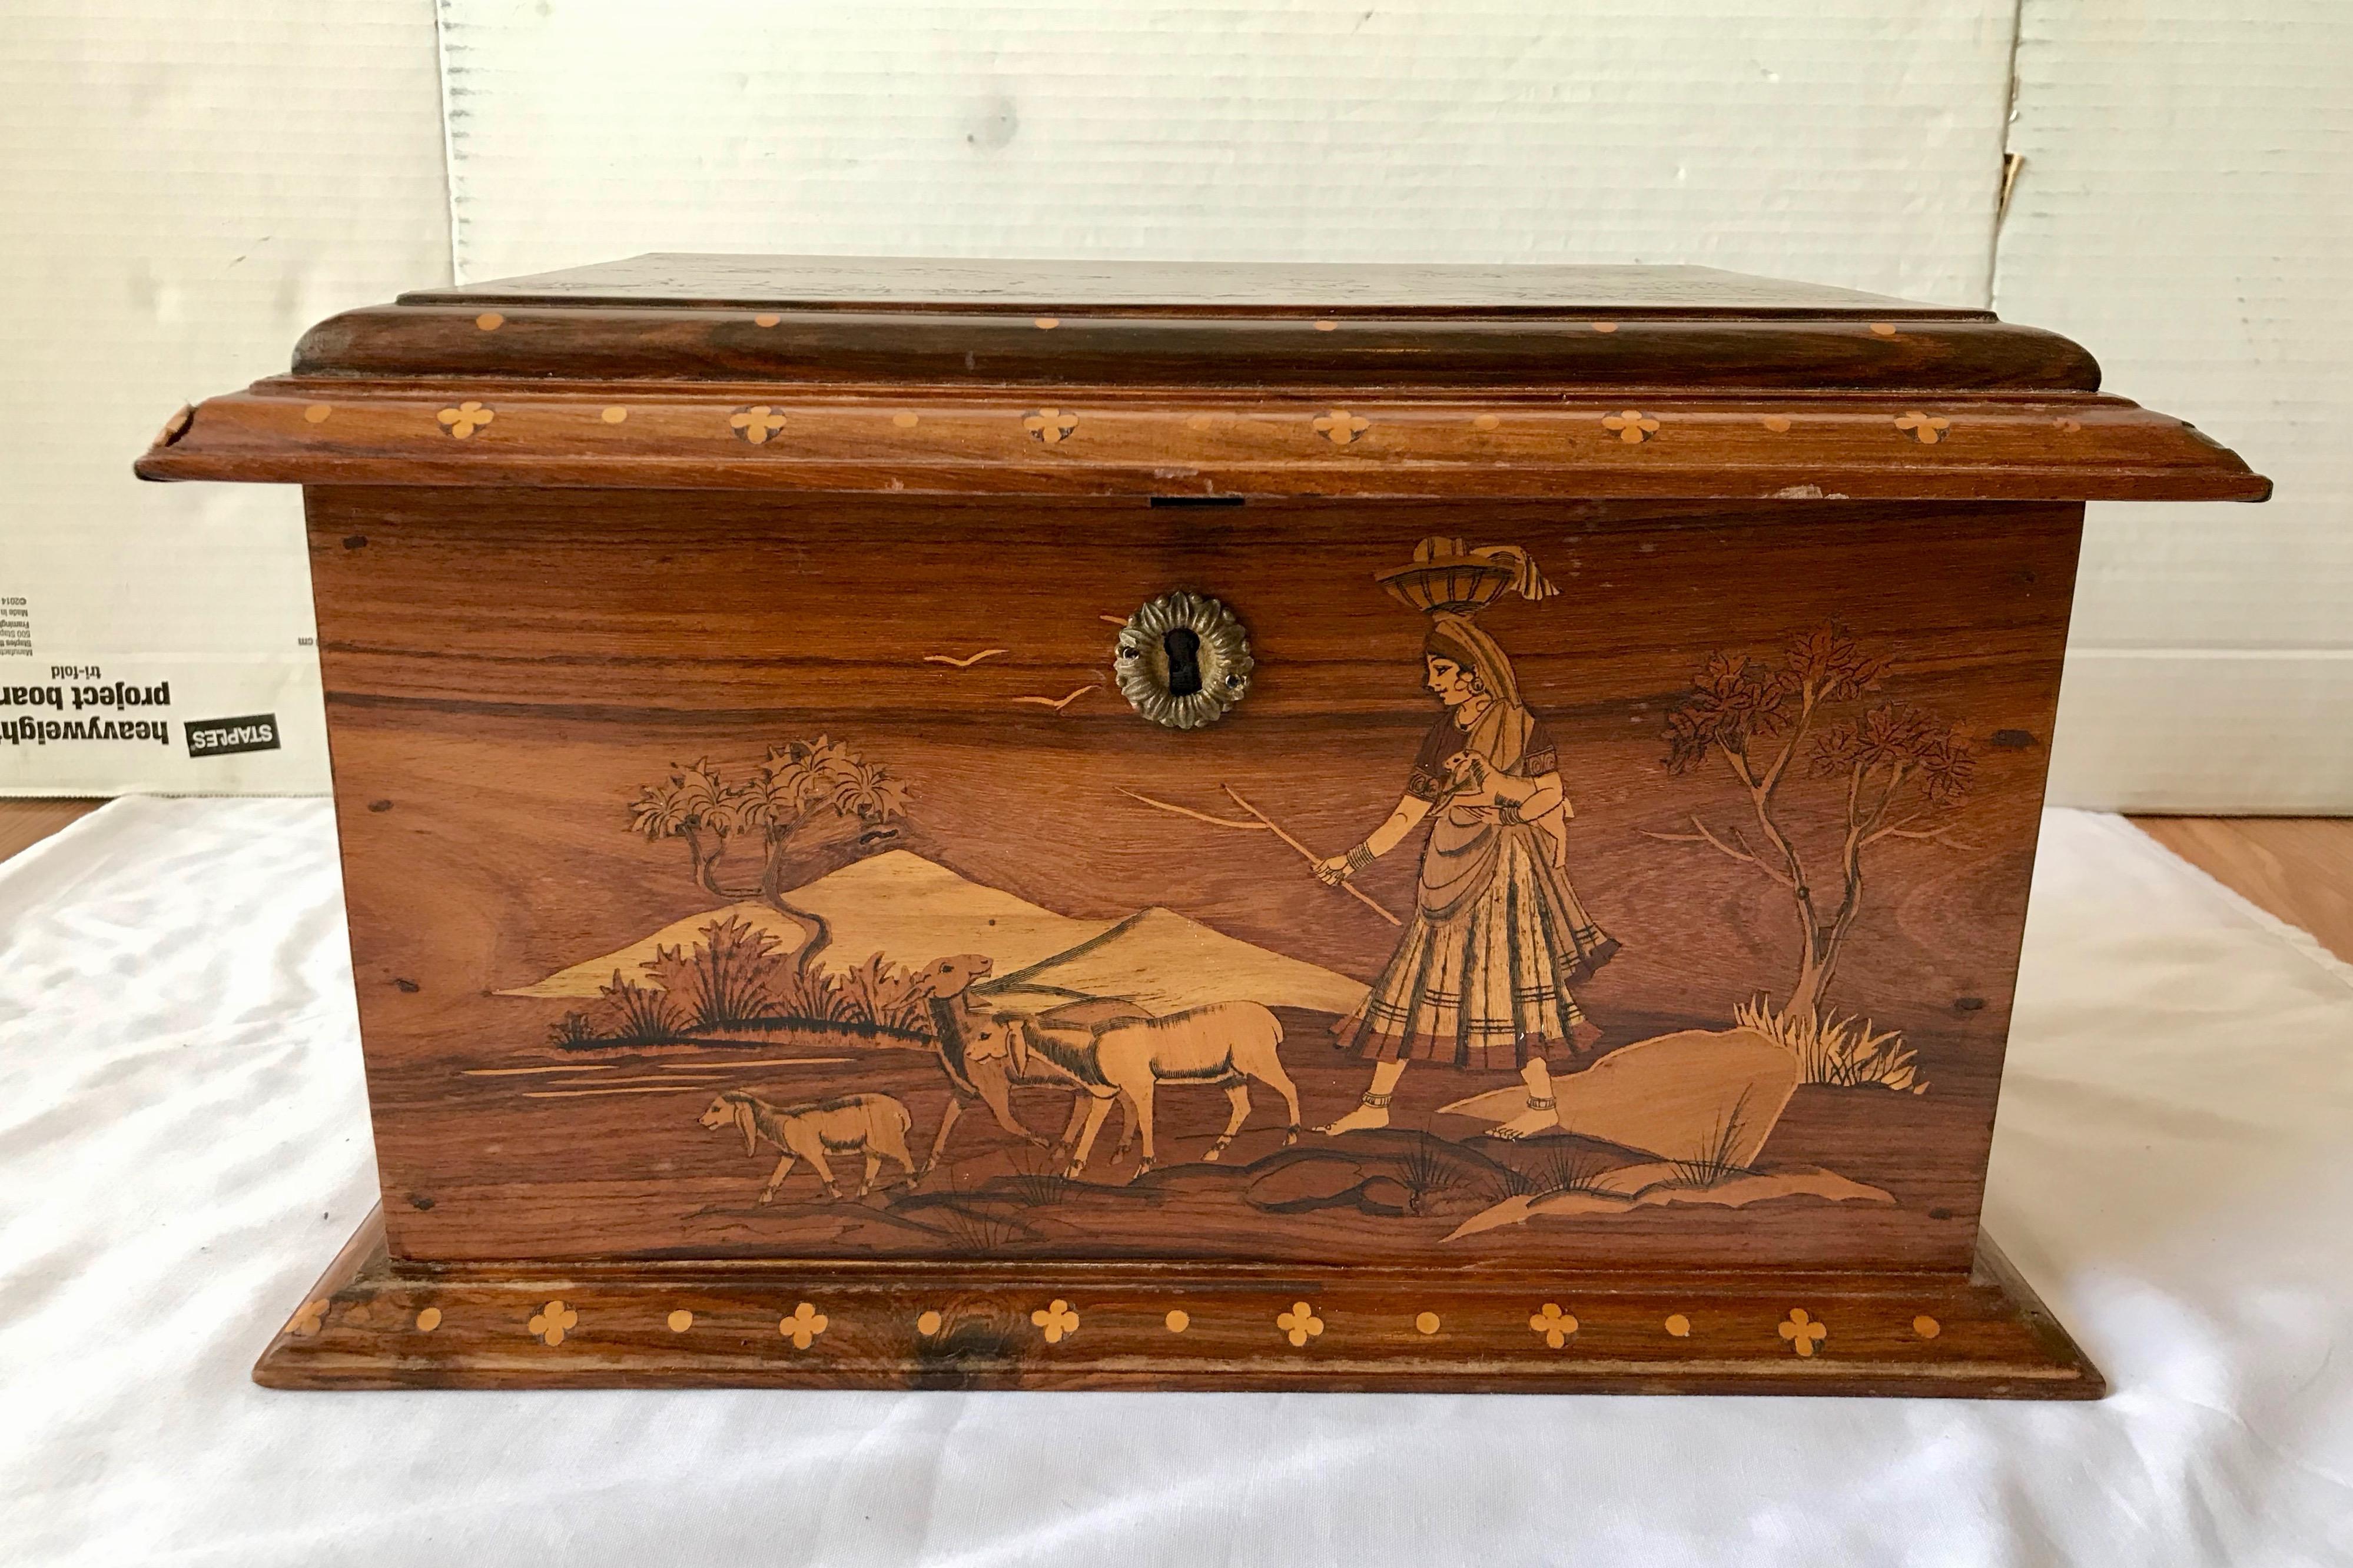 A fine specimen in the provincial fabled Sorrento style
with prominent colorful figures. 
The piece is generously scaled and beautifully appointed.
Each side, as well as top, with a different scene.